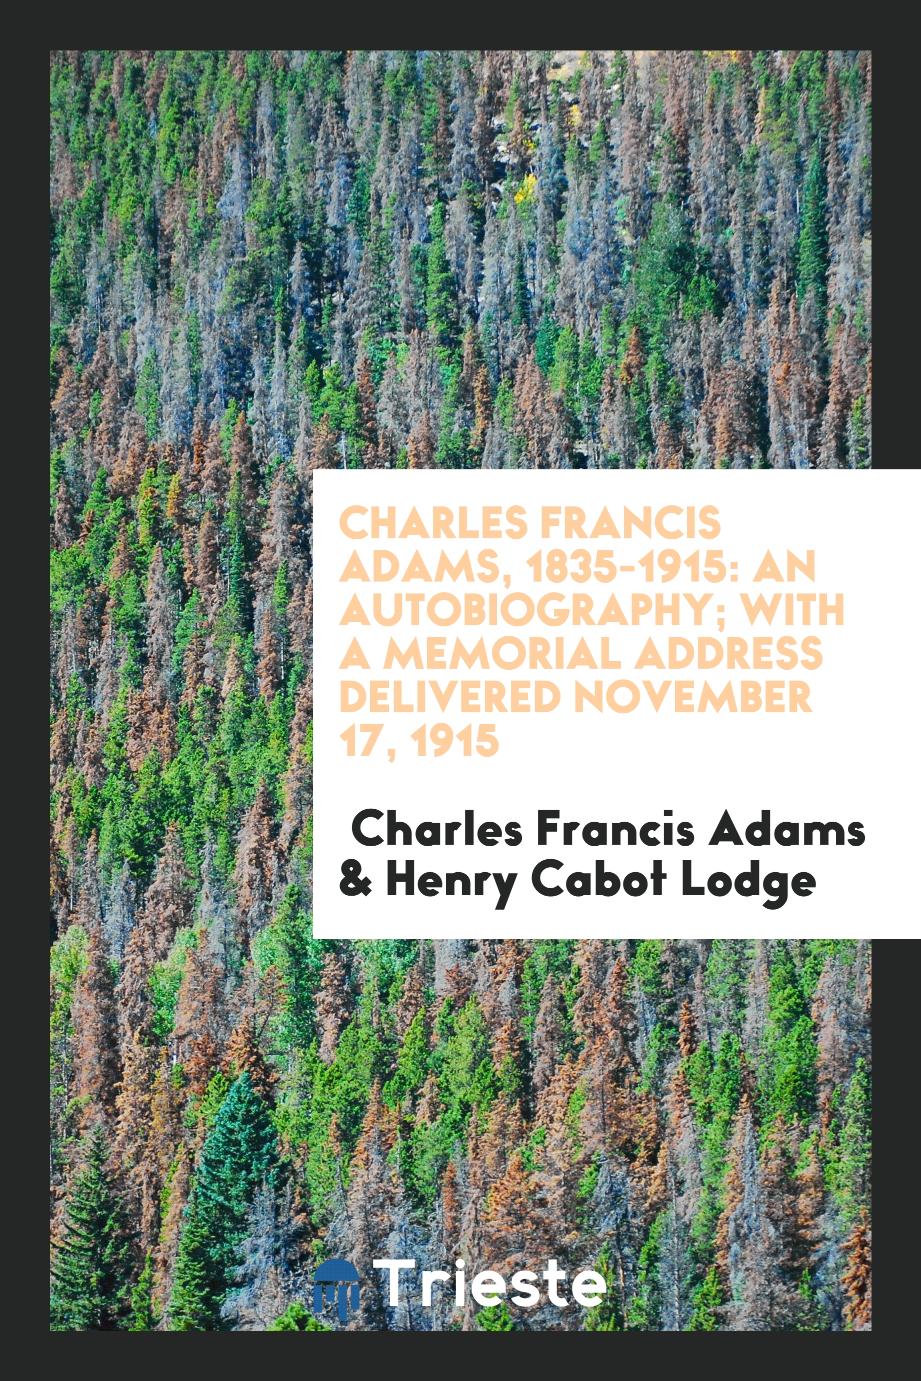 Charles Francis Adams, 1835-1915: An Autobiography; With a Memorial Address Delivered November 17, 1915